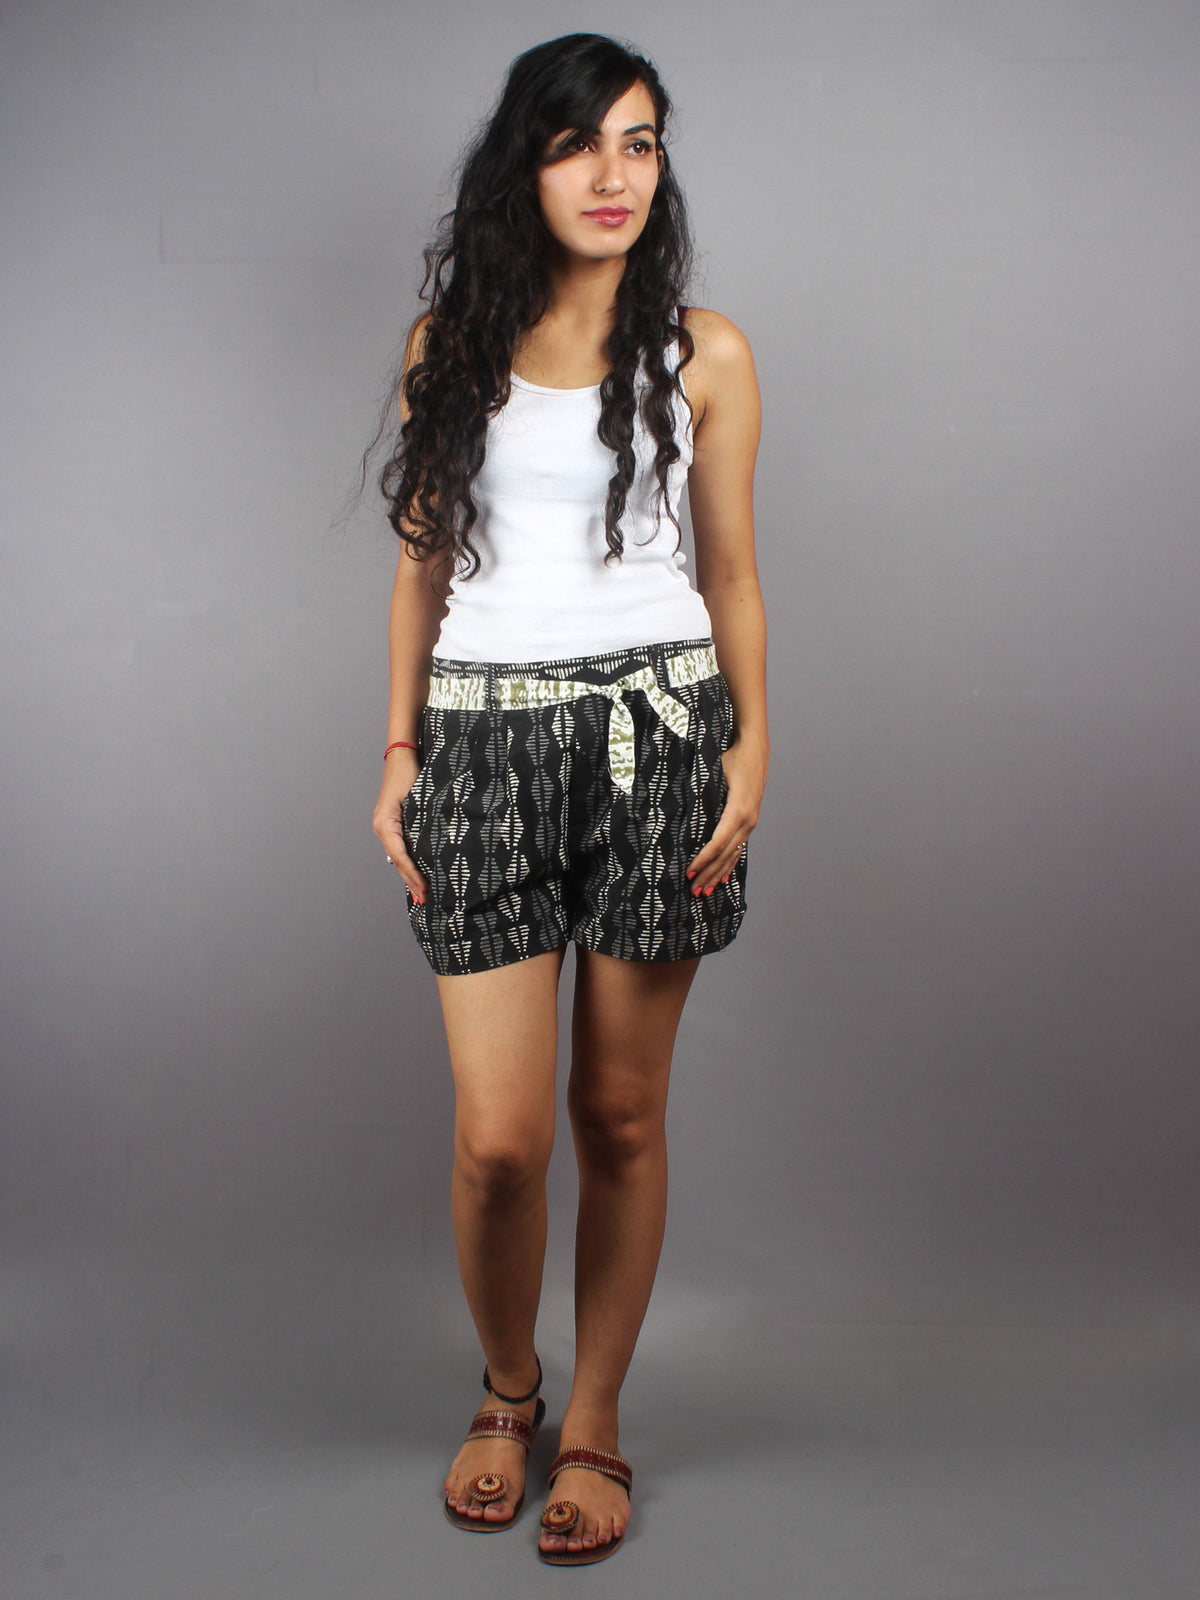 Black Hand Block Printed Shorts With Belt -S5296007